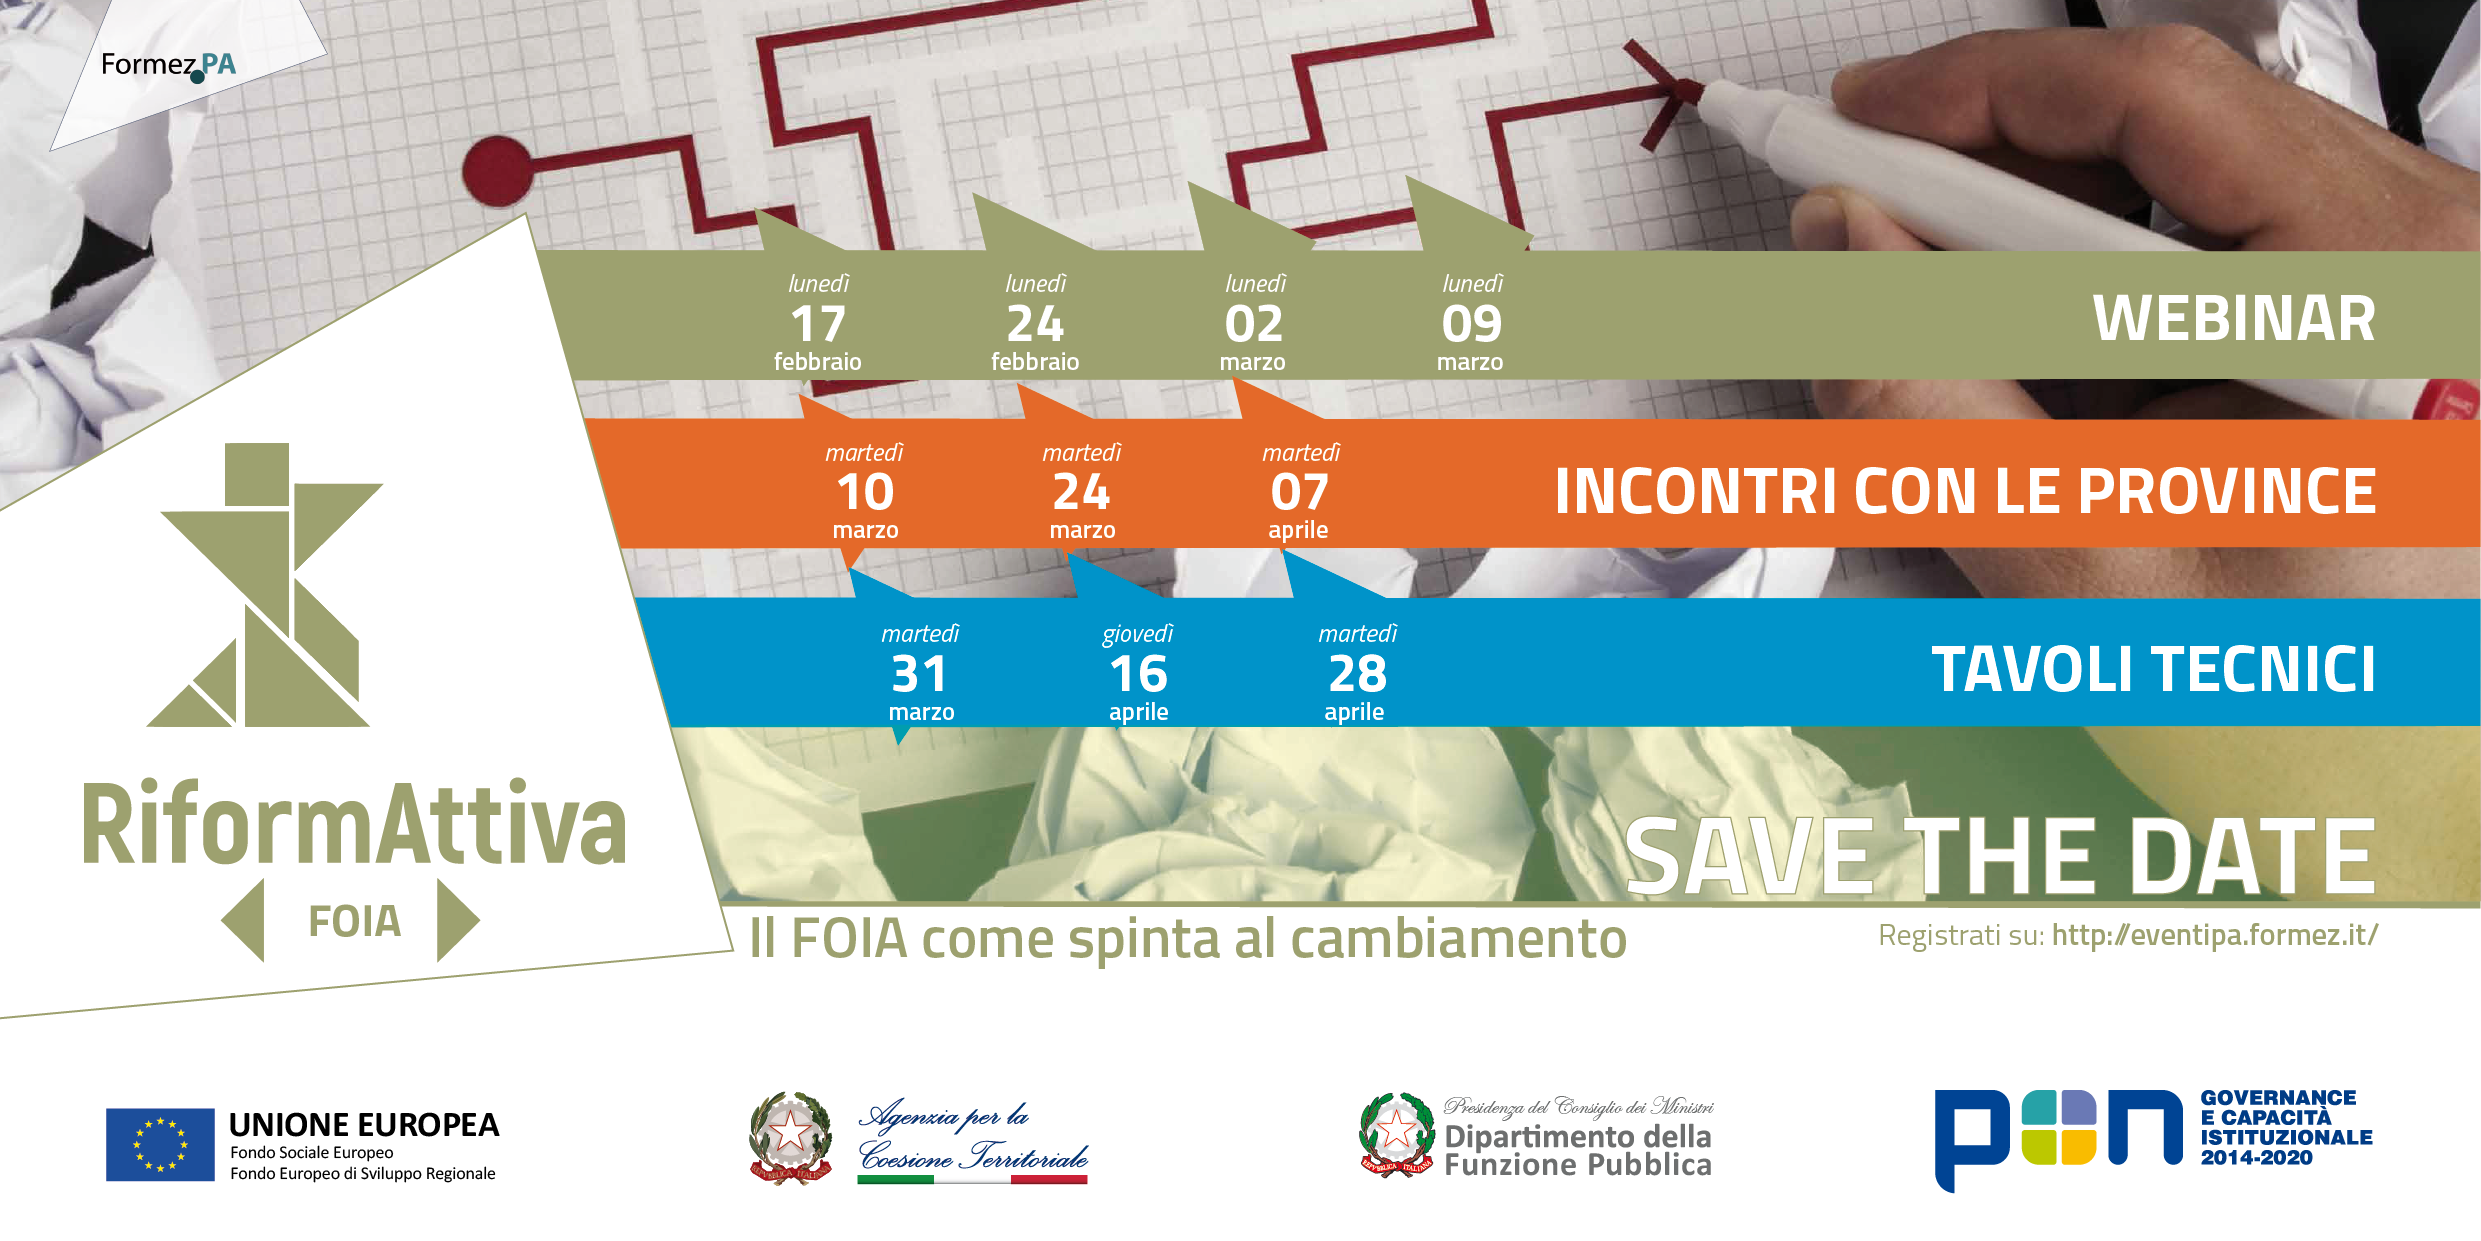 http://www.pongovernance1420.gov.it/wp-content/uploads/2020/02/Save_the_date-TUTTI-FOIA_new-01.png